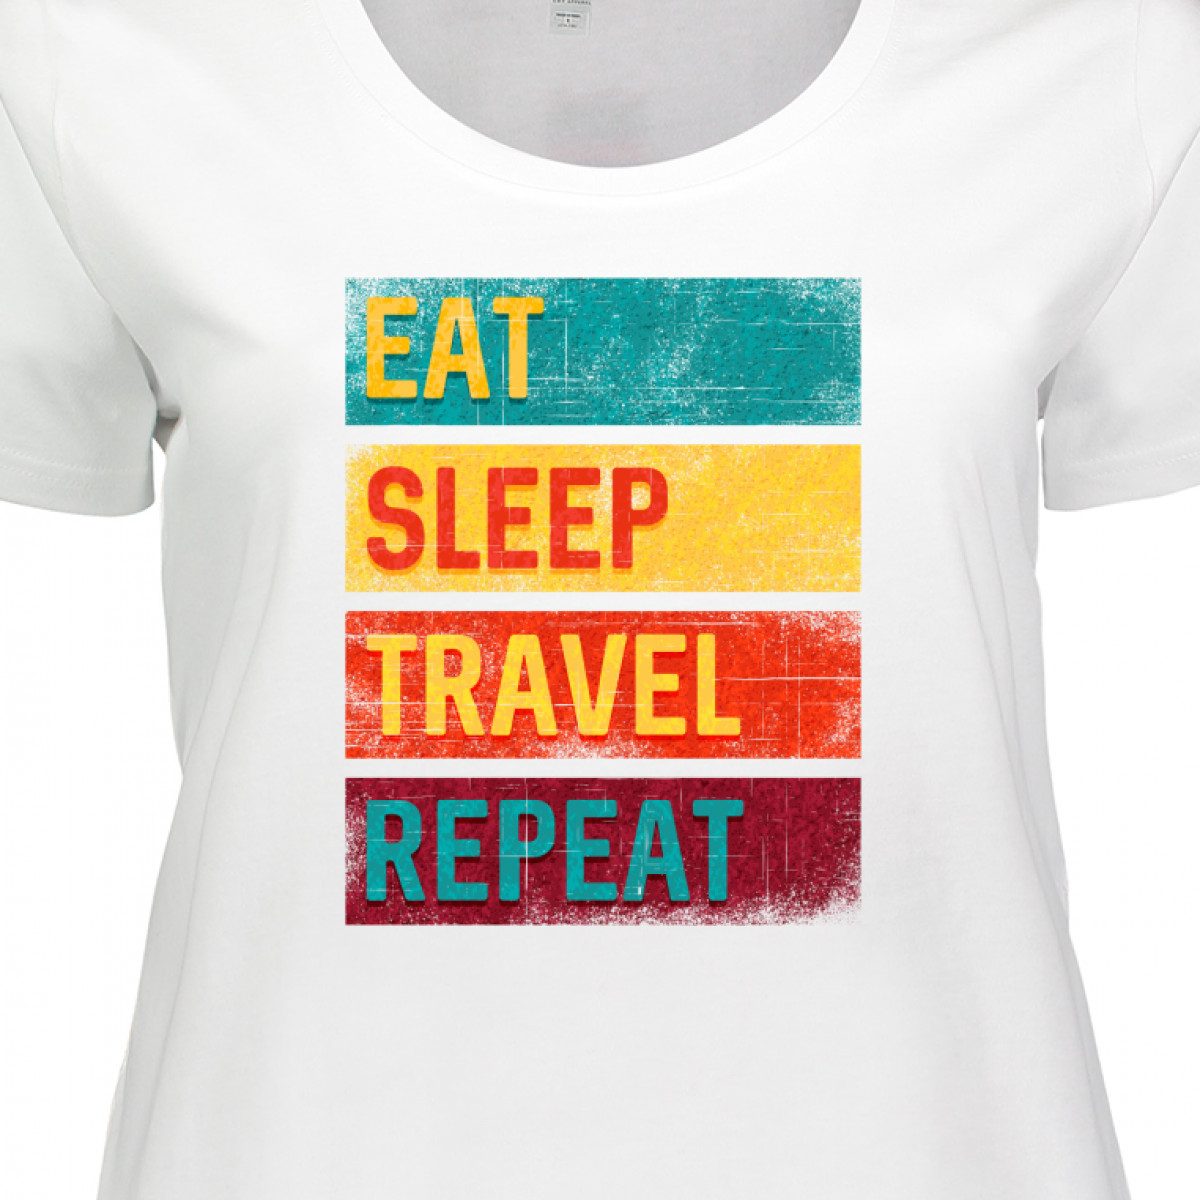 Inktastic Vacation Eat Sleep Travel Repeat Women's Plus Size T-Shirt - image 3 of 4